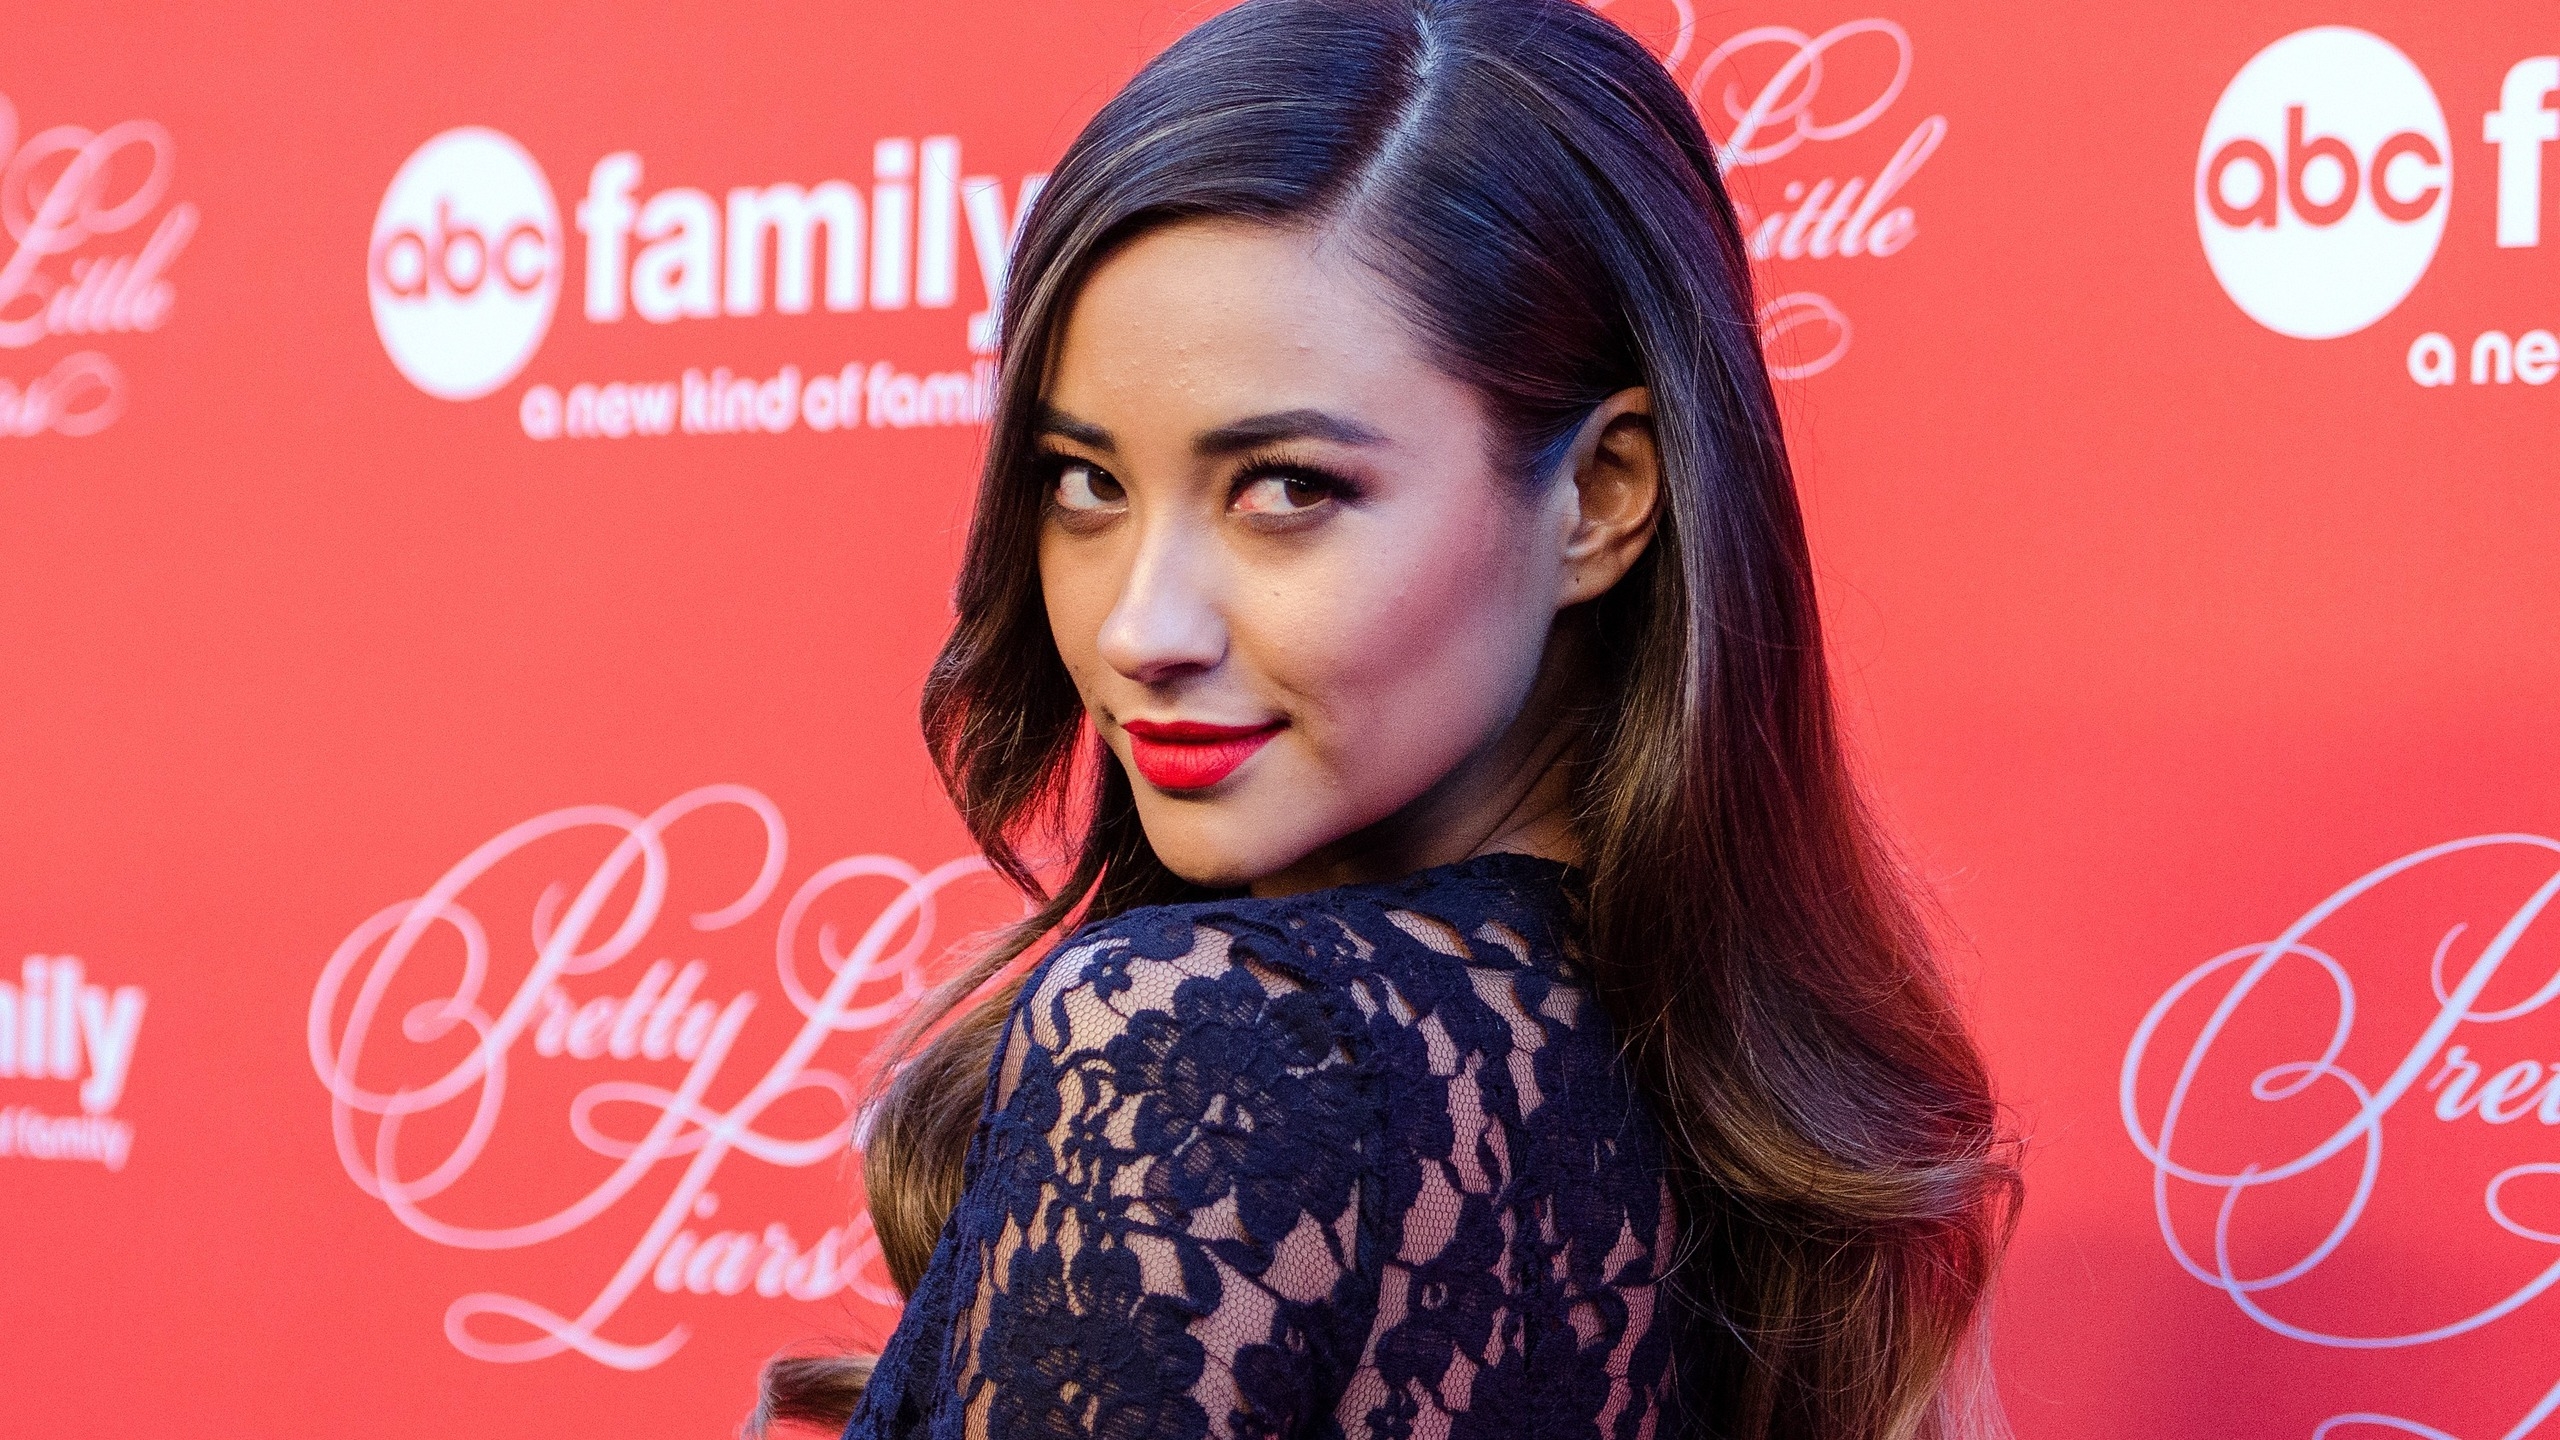 Shay Mitchell Lips for 2560x1440 HDTV resolution